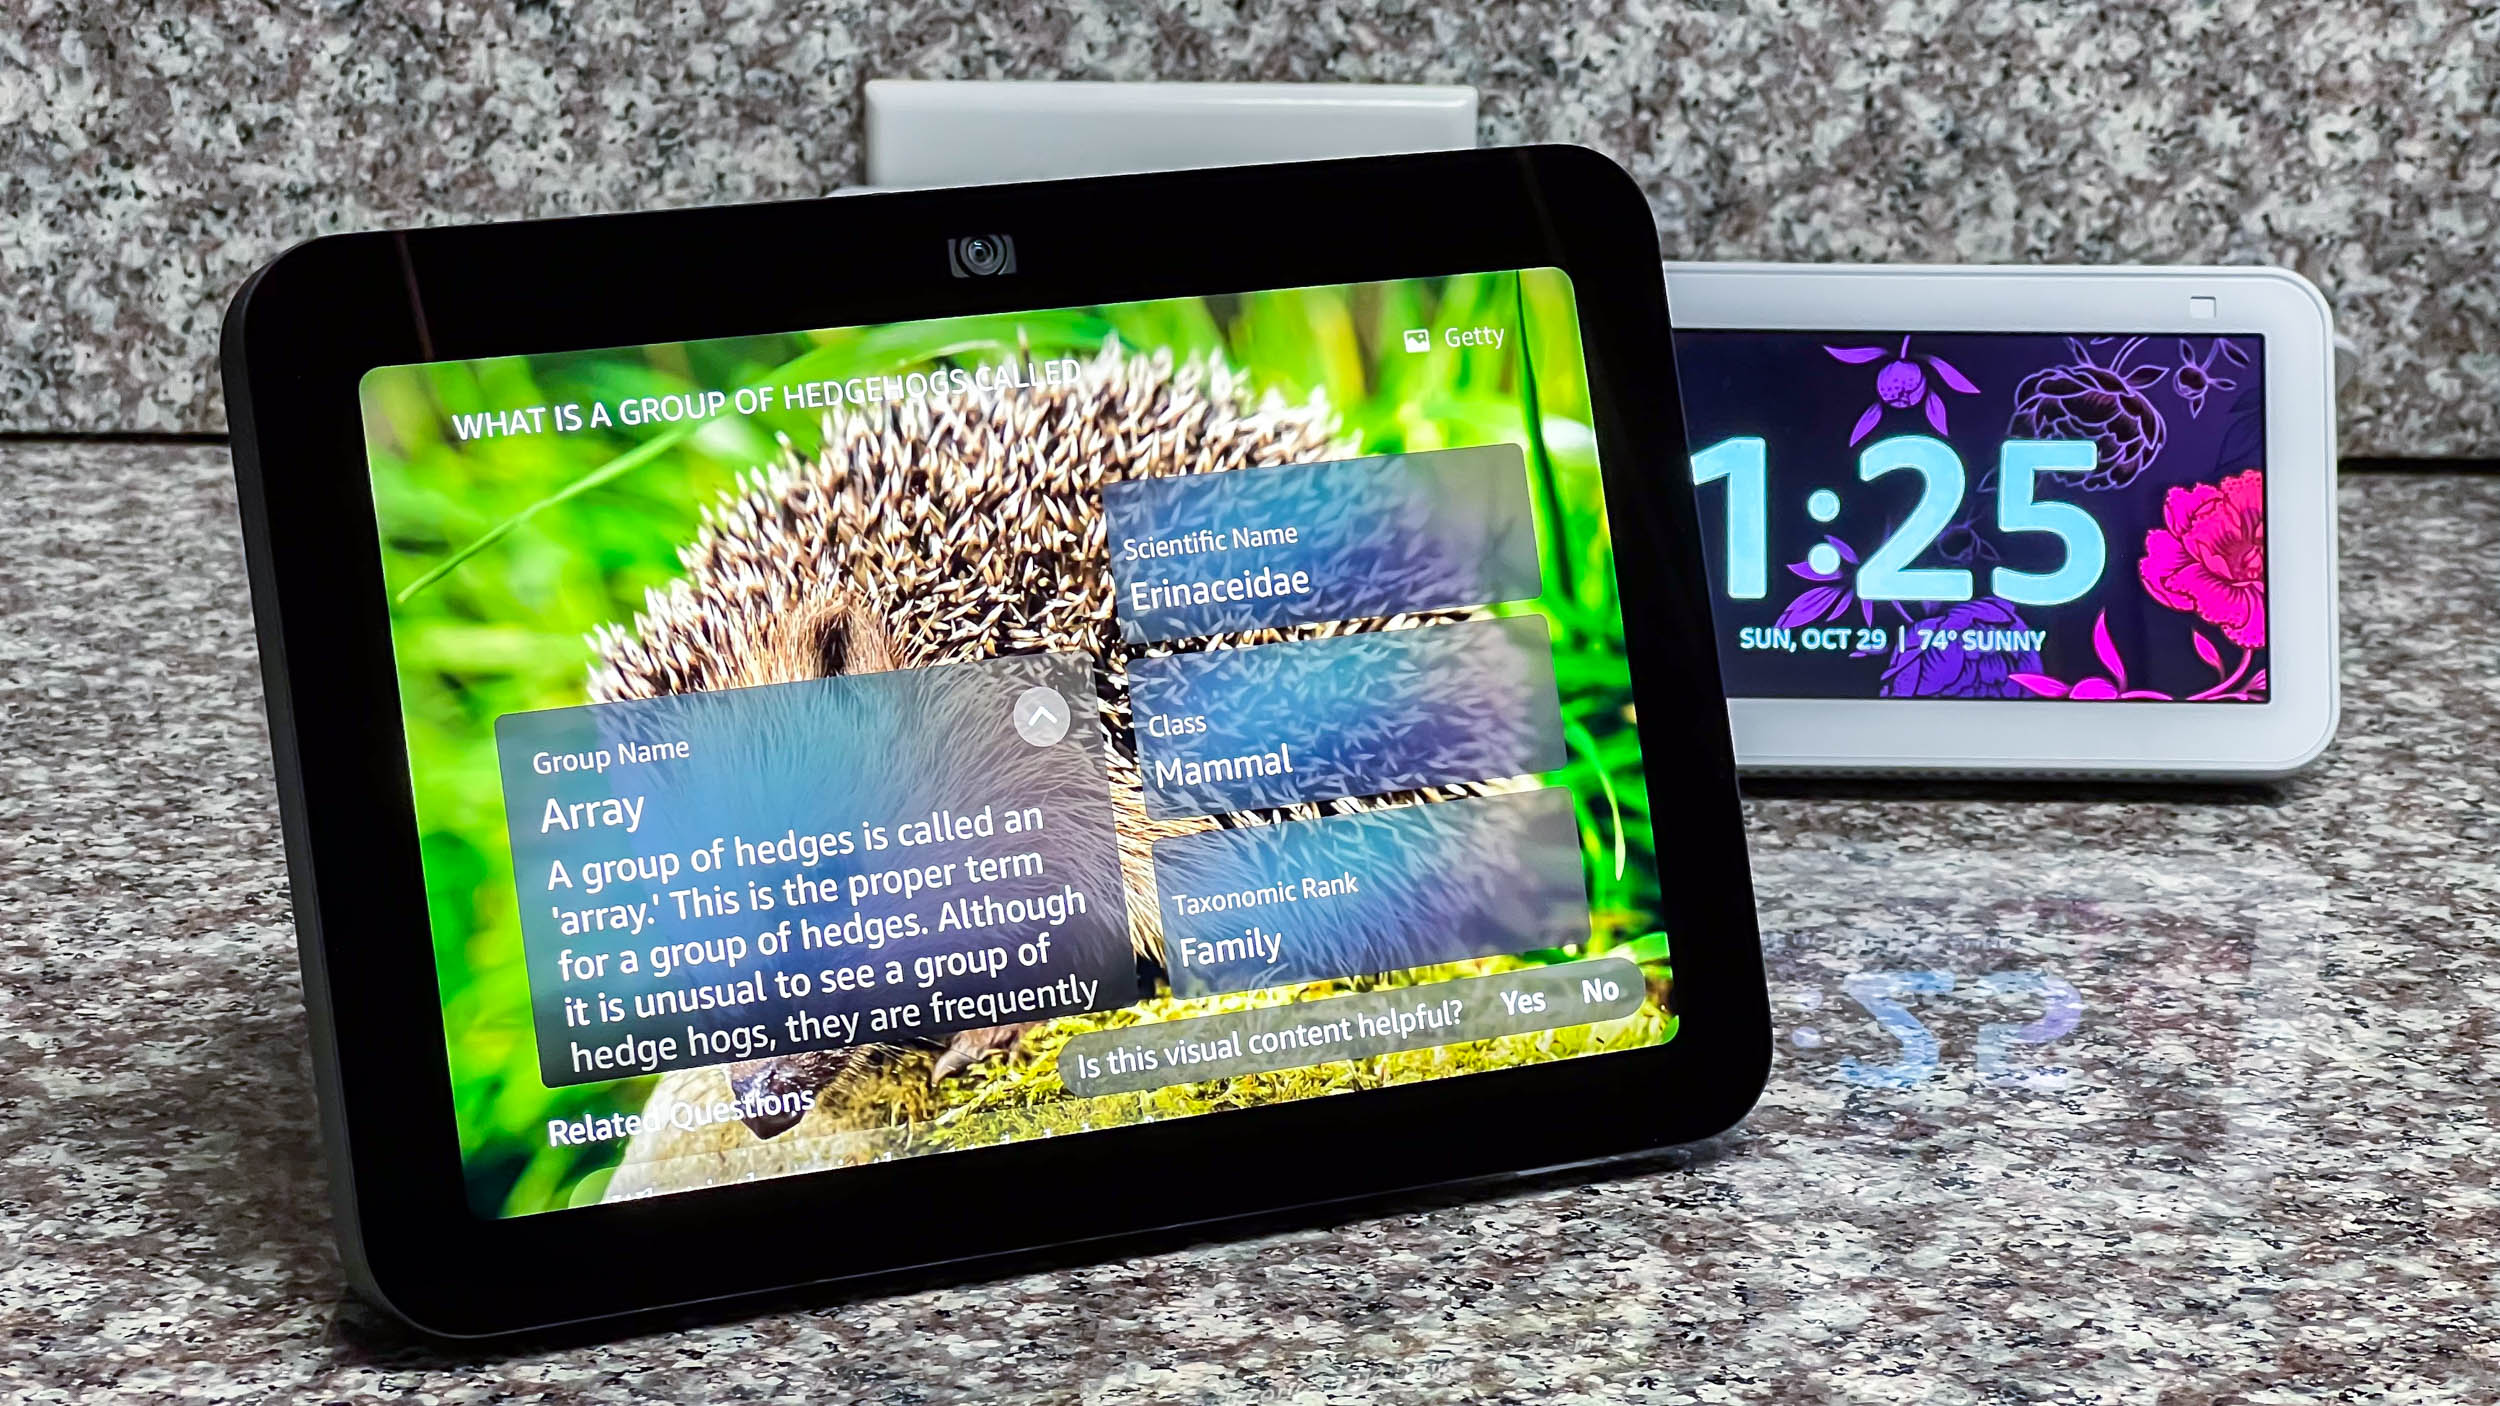 Amazon Echo Show 8 (3rd gen) in use by author